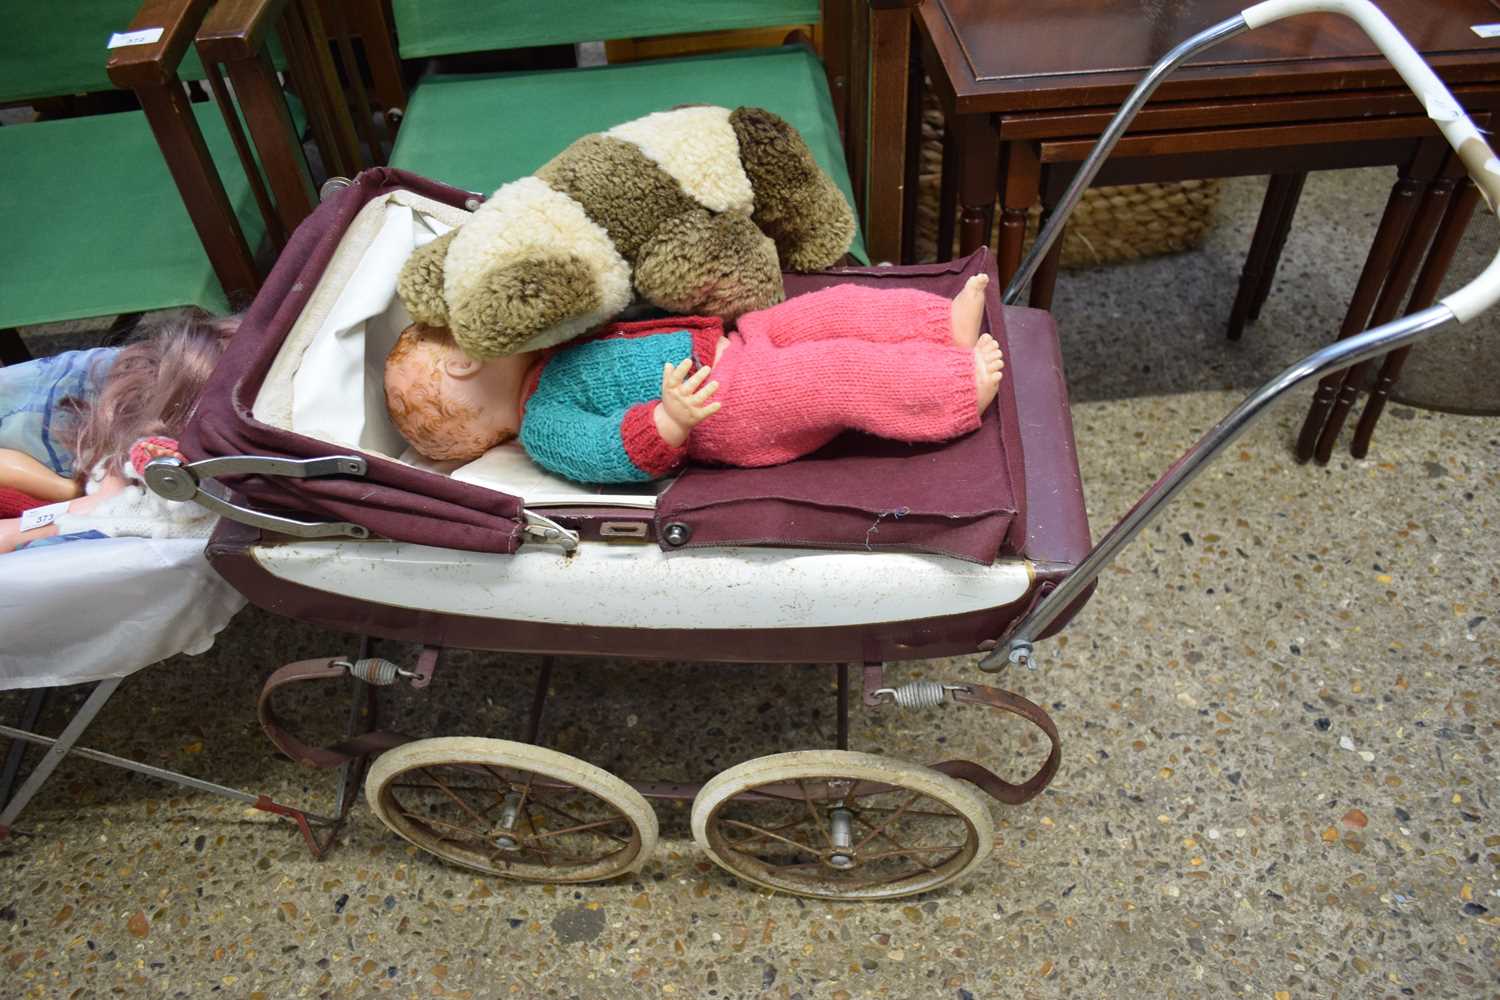 VINTAGE TRIANG DOLLS PRAM CONTAINING A DOLL AND A TEDDY